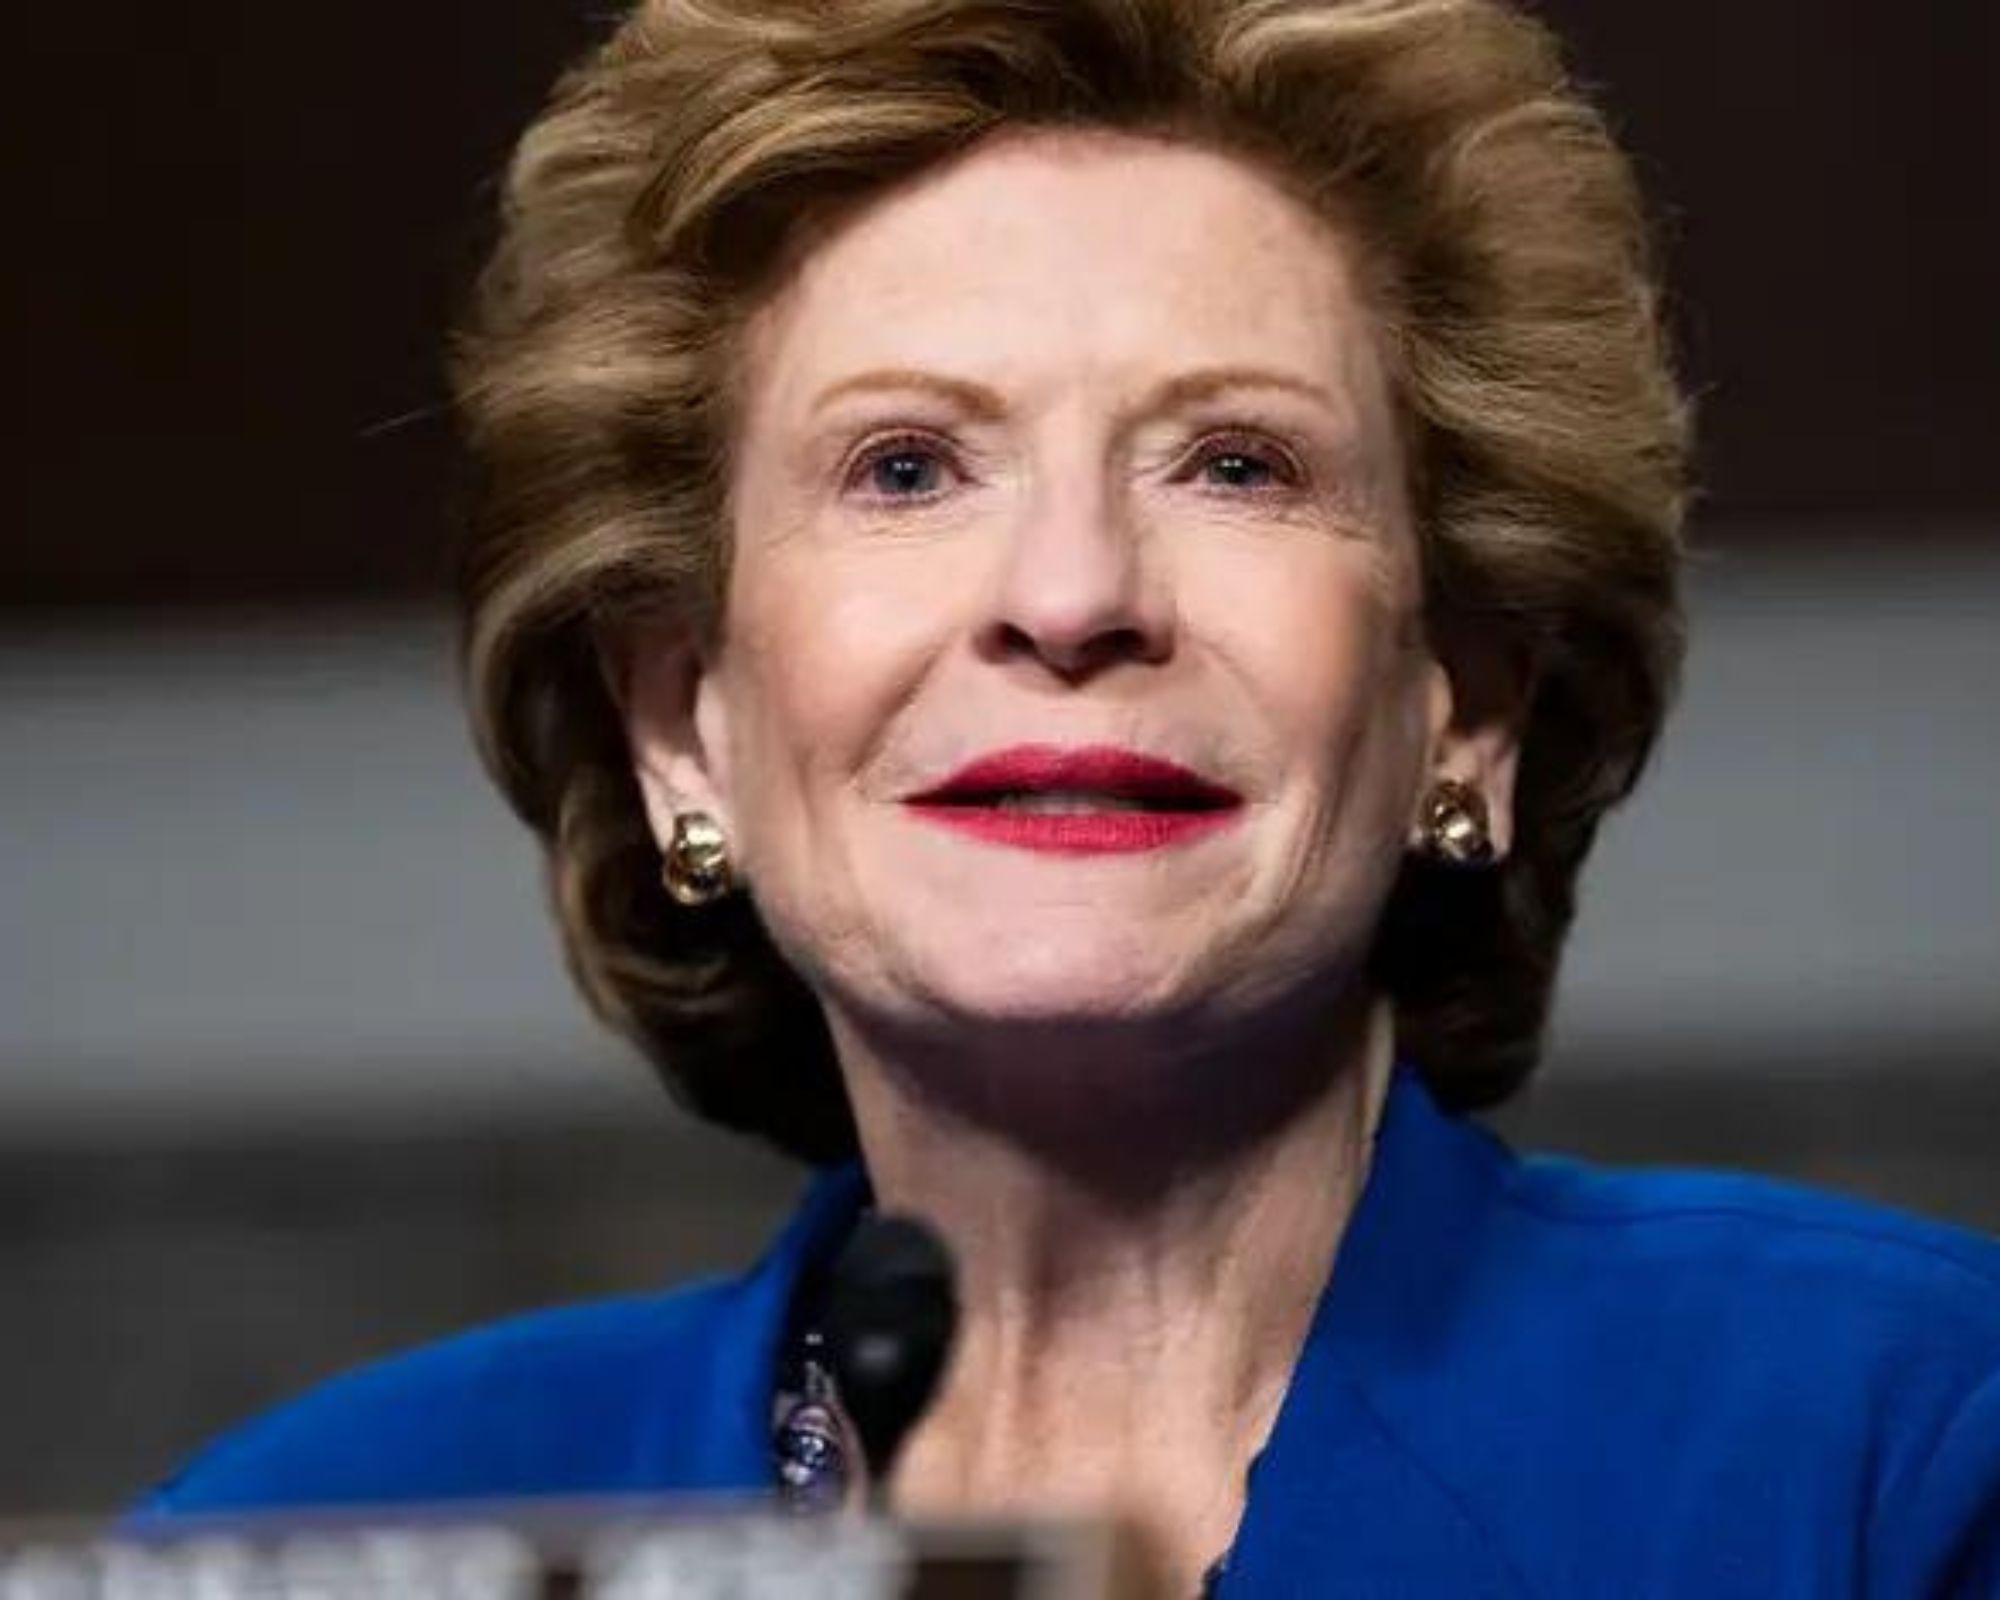 Democrats are rushing to replace Debbie Stabenow